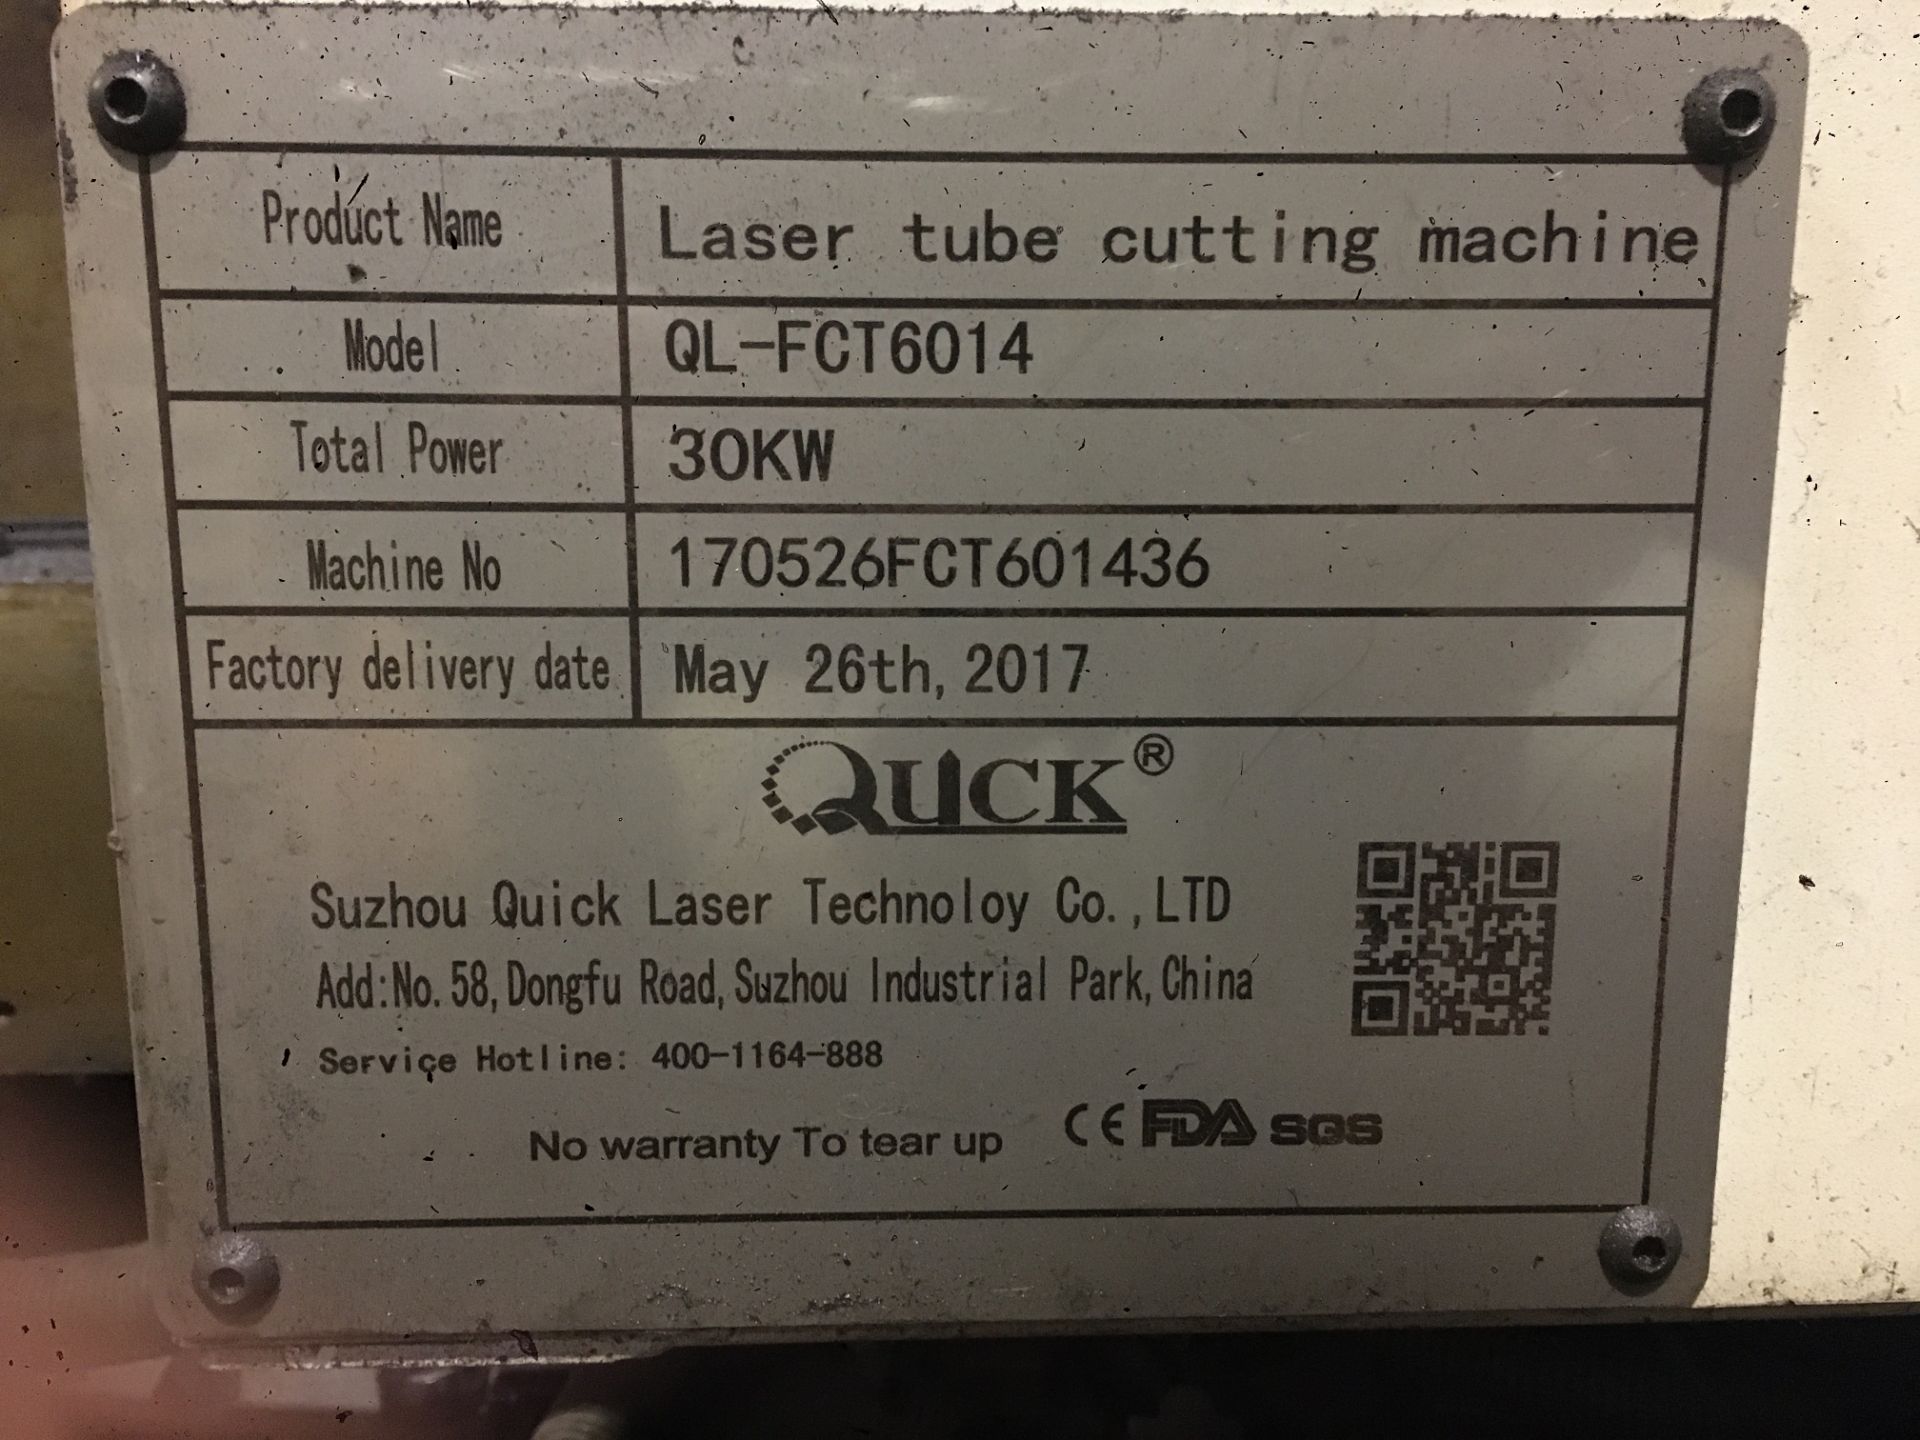 Suzhou Quick Laser Technology Co. Ltd, QL-FCT6014D 30kw laser tube cutting machine, Serial No. - Image 11 of 18